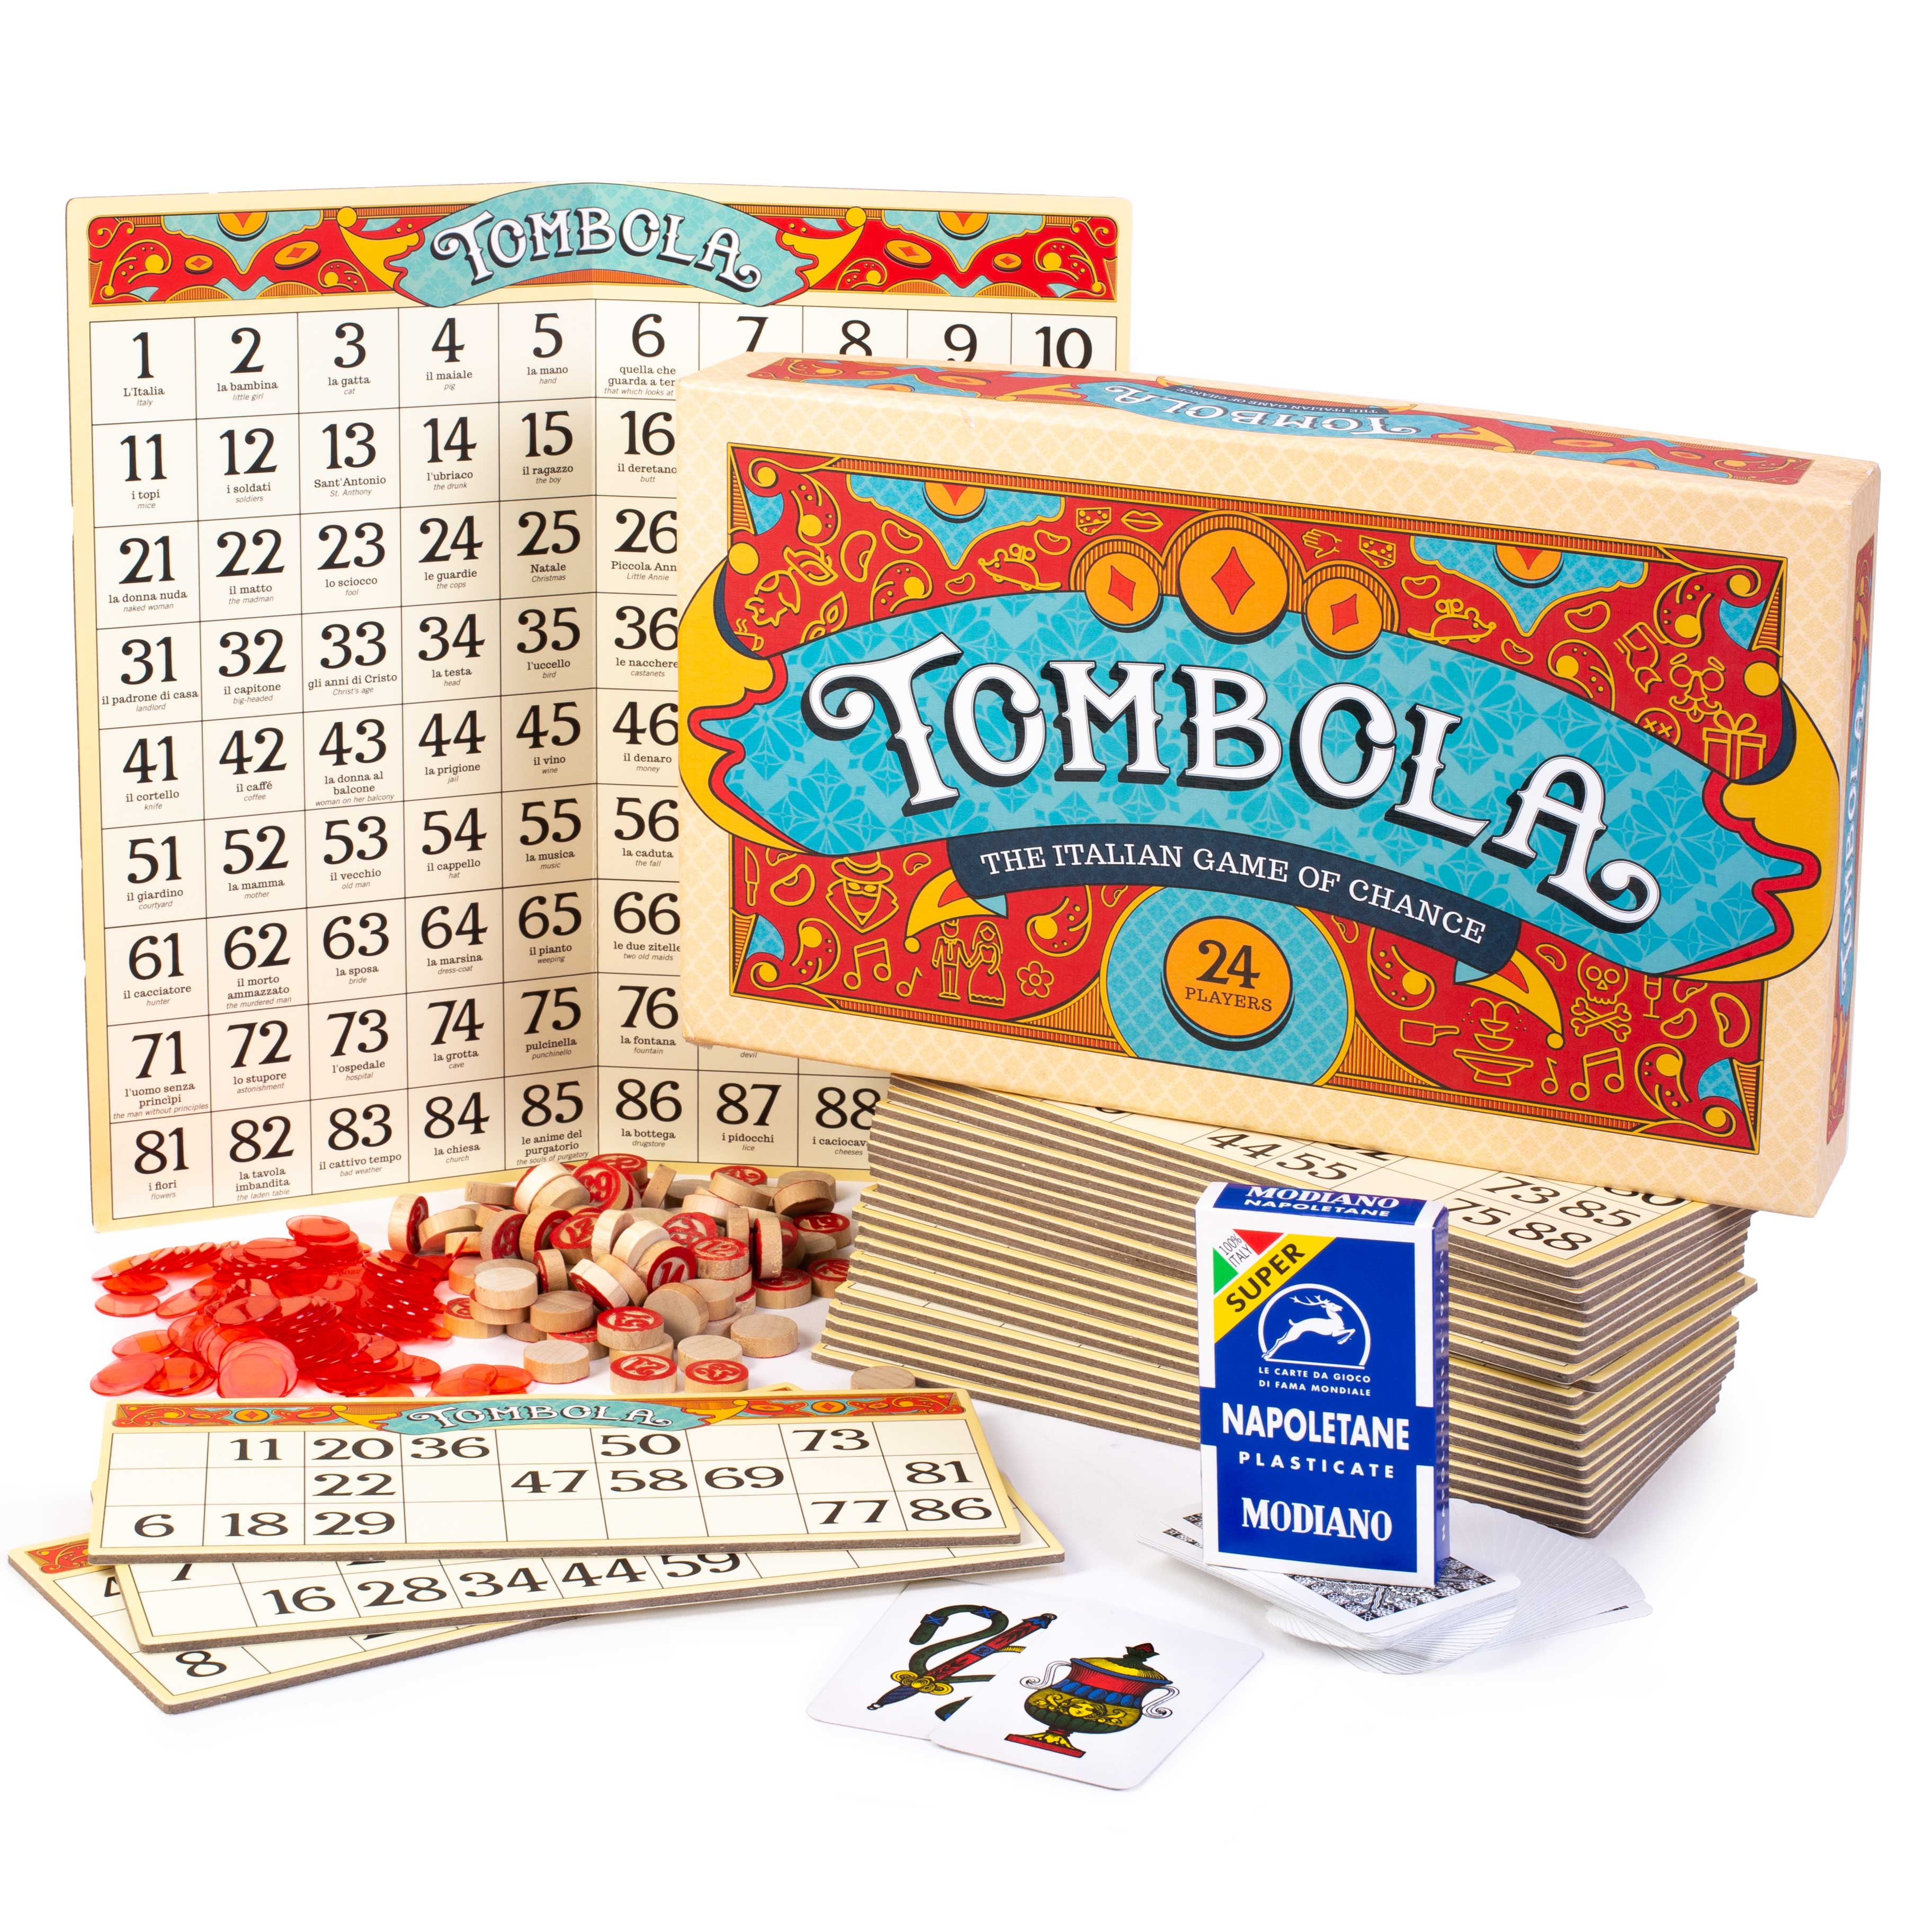 Friends and Large Parties Up to 24 Players! The Italian Game of Chance for Family Tombola Bingo Board Game 90 Tombolini Tiles Includes Calling Board 24 Double-Sided Cards and 360 Chips 